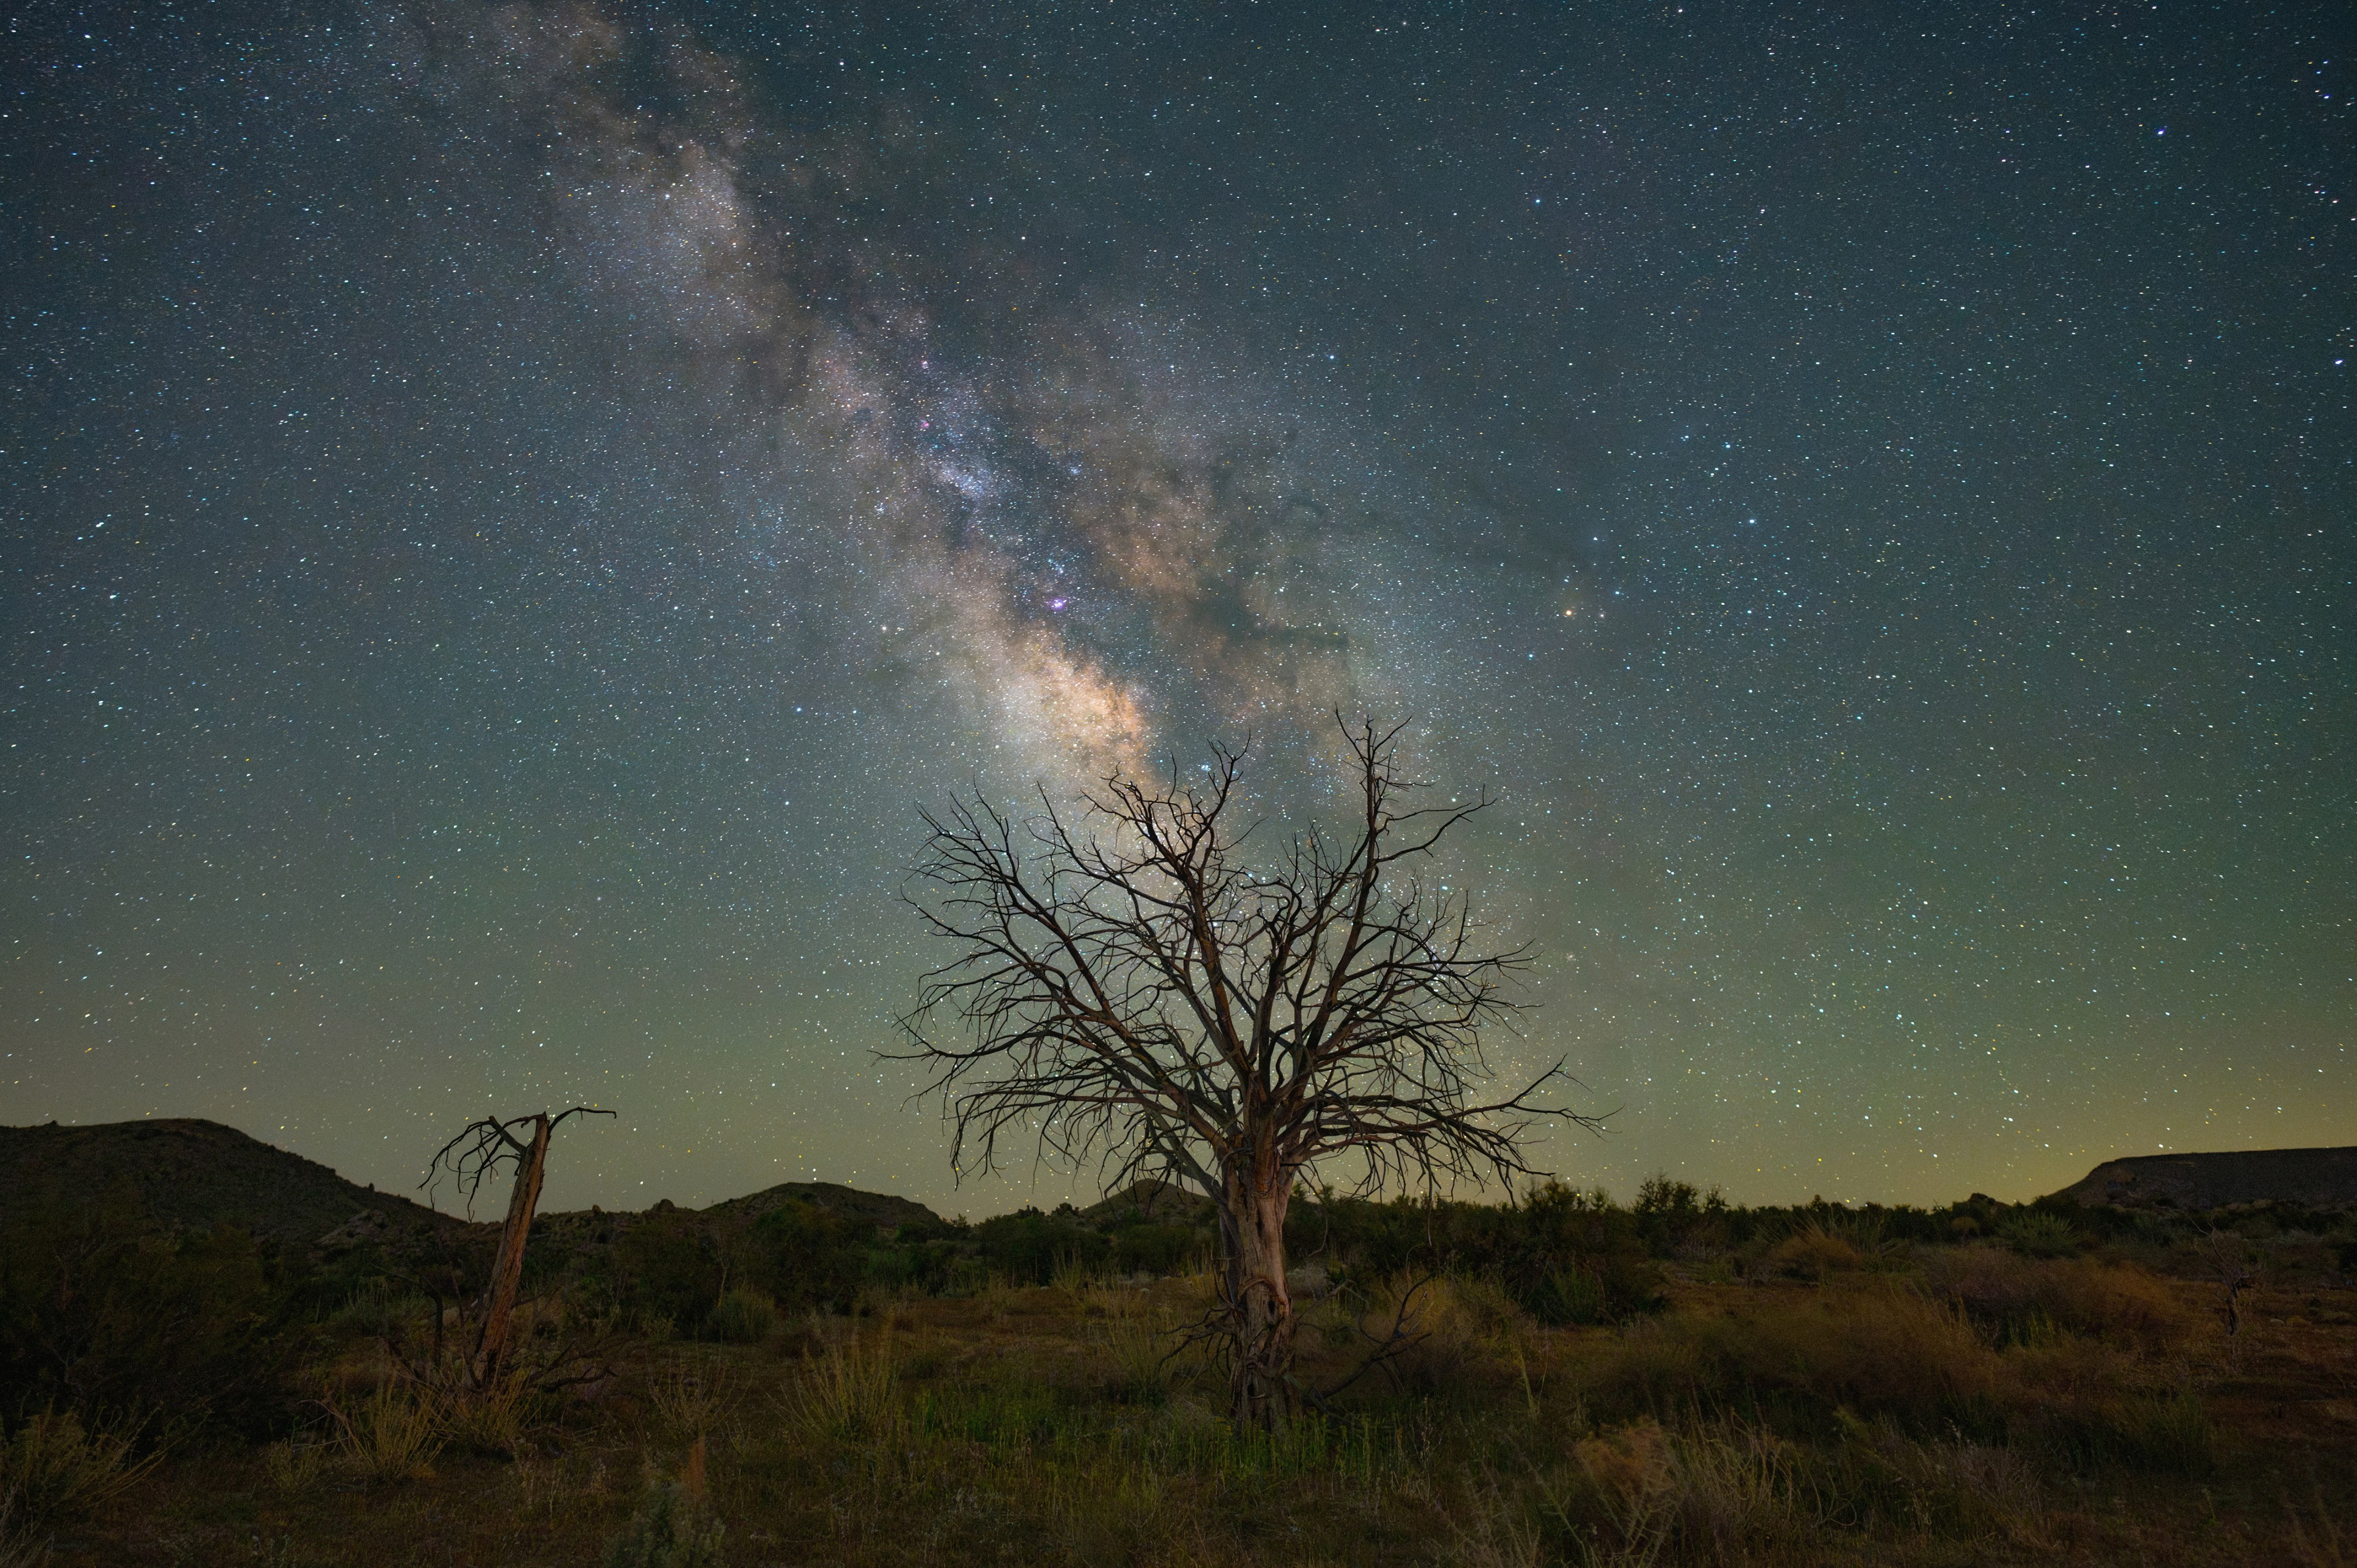 The bright, glowing Milky way fills the middle of this desert landscape.